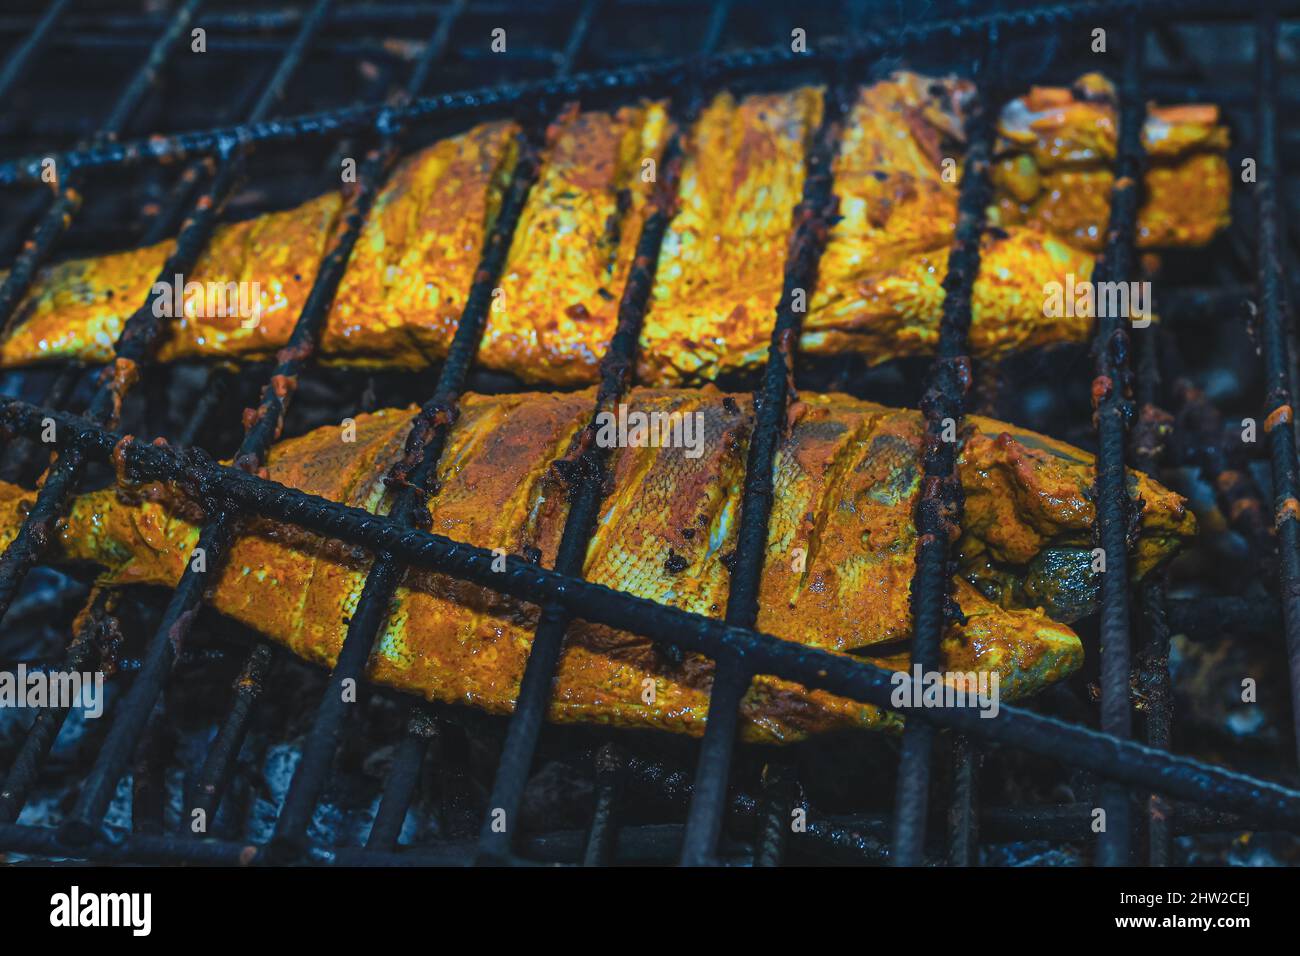 Page 2 - L Grill High Resolution Stock Photography and Images - Alamy